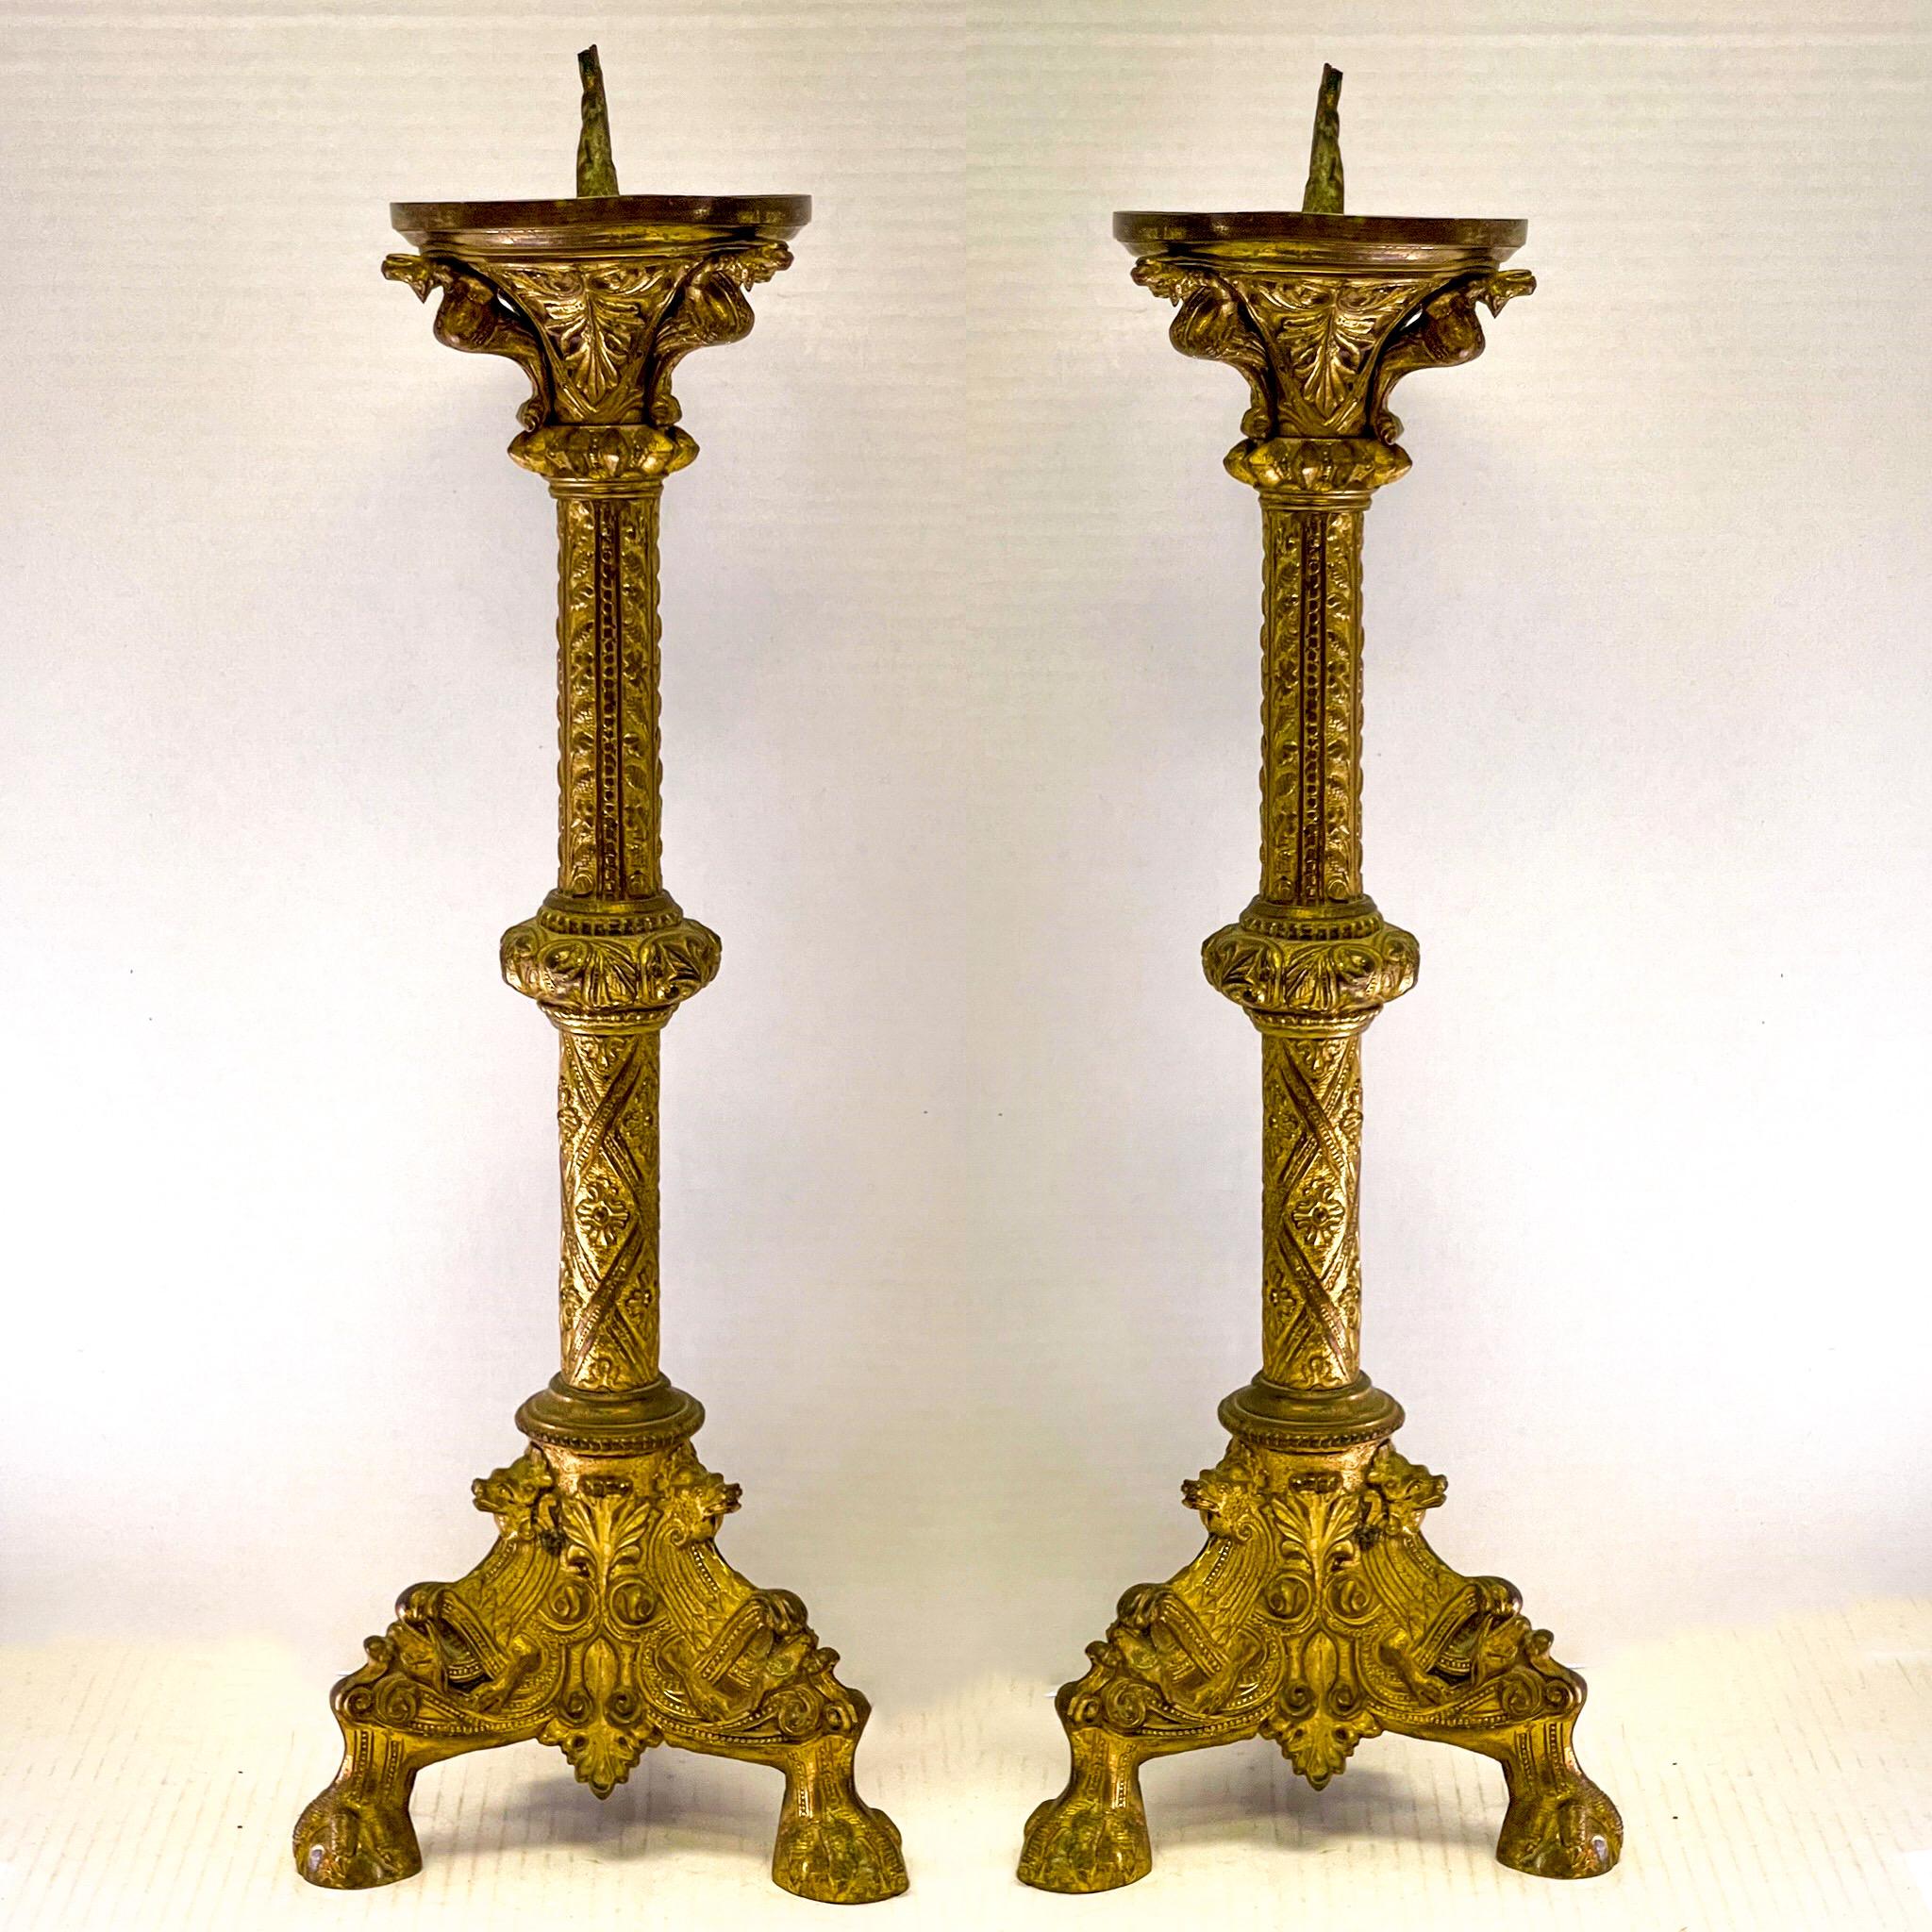 19th-C. Italian Brass Repousse Alter Pricket Candlesticks, Pair For Sale 2